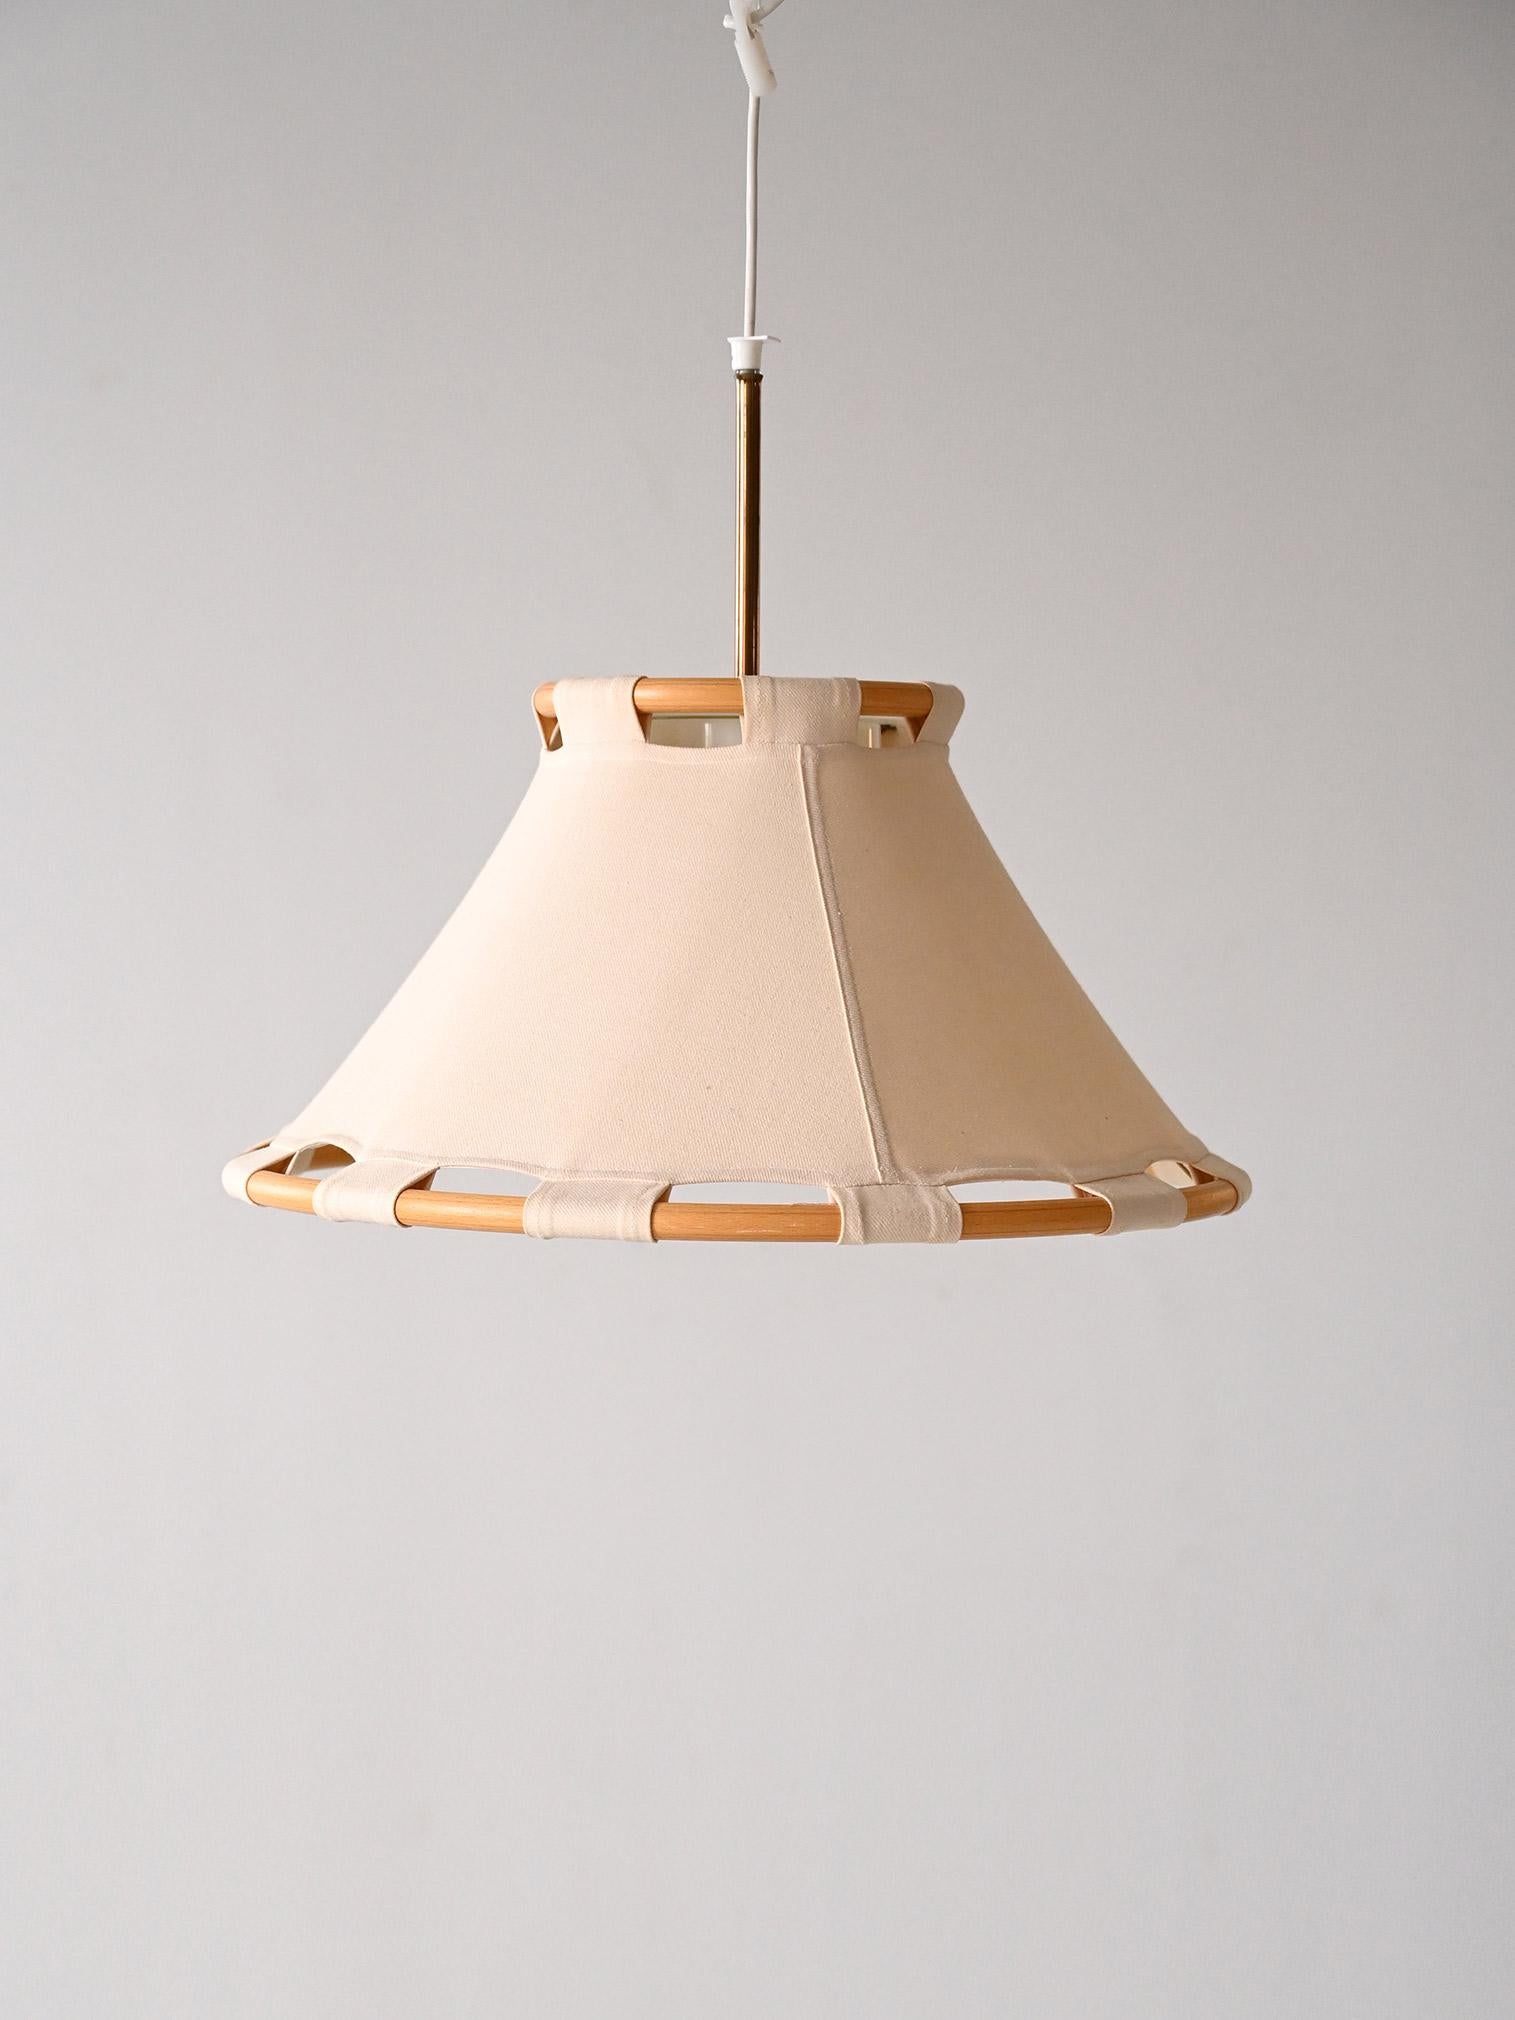 Vintage lamp designed for Ateljé Lyktan in the 1970s.

This piece of original Scandinavian design is an elegant mix of different materials, the shade is made of canvas, the frame is made of bamboo and the light is filtered by a plexiglass sheet.
A